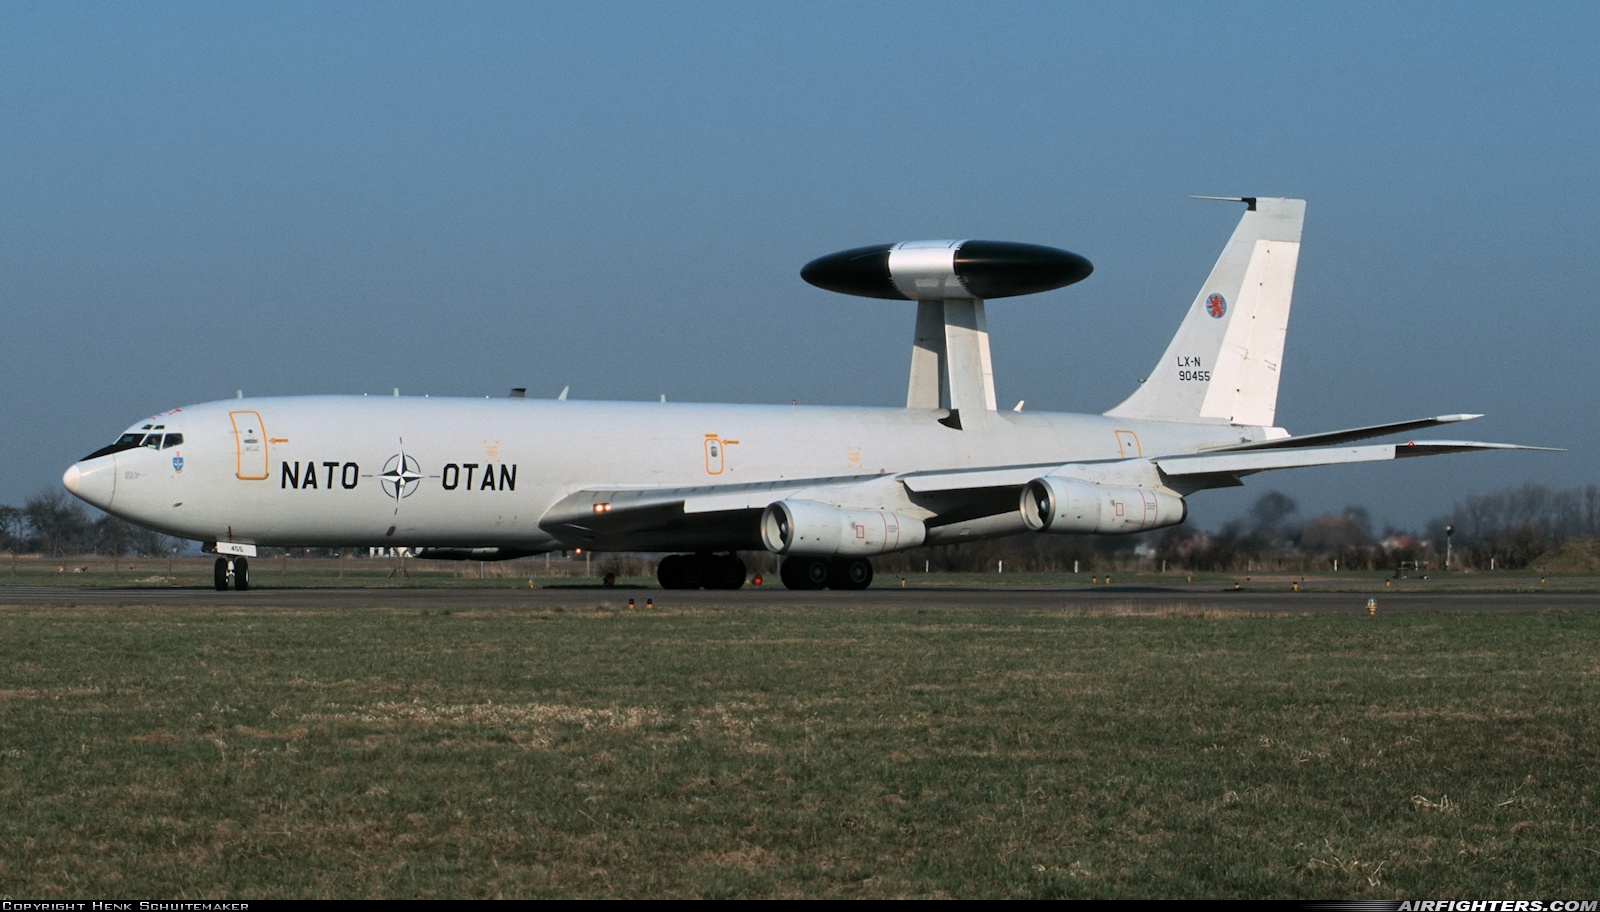 Luxembourg - NATO Boeing E-3A Sentry (707-300) LX-N90455 at Leeuwarden (LWR / EHLW), Netherlands